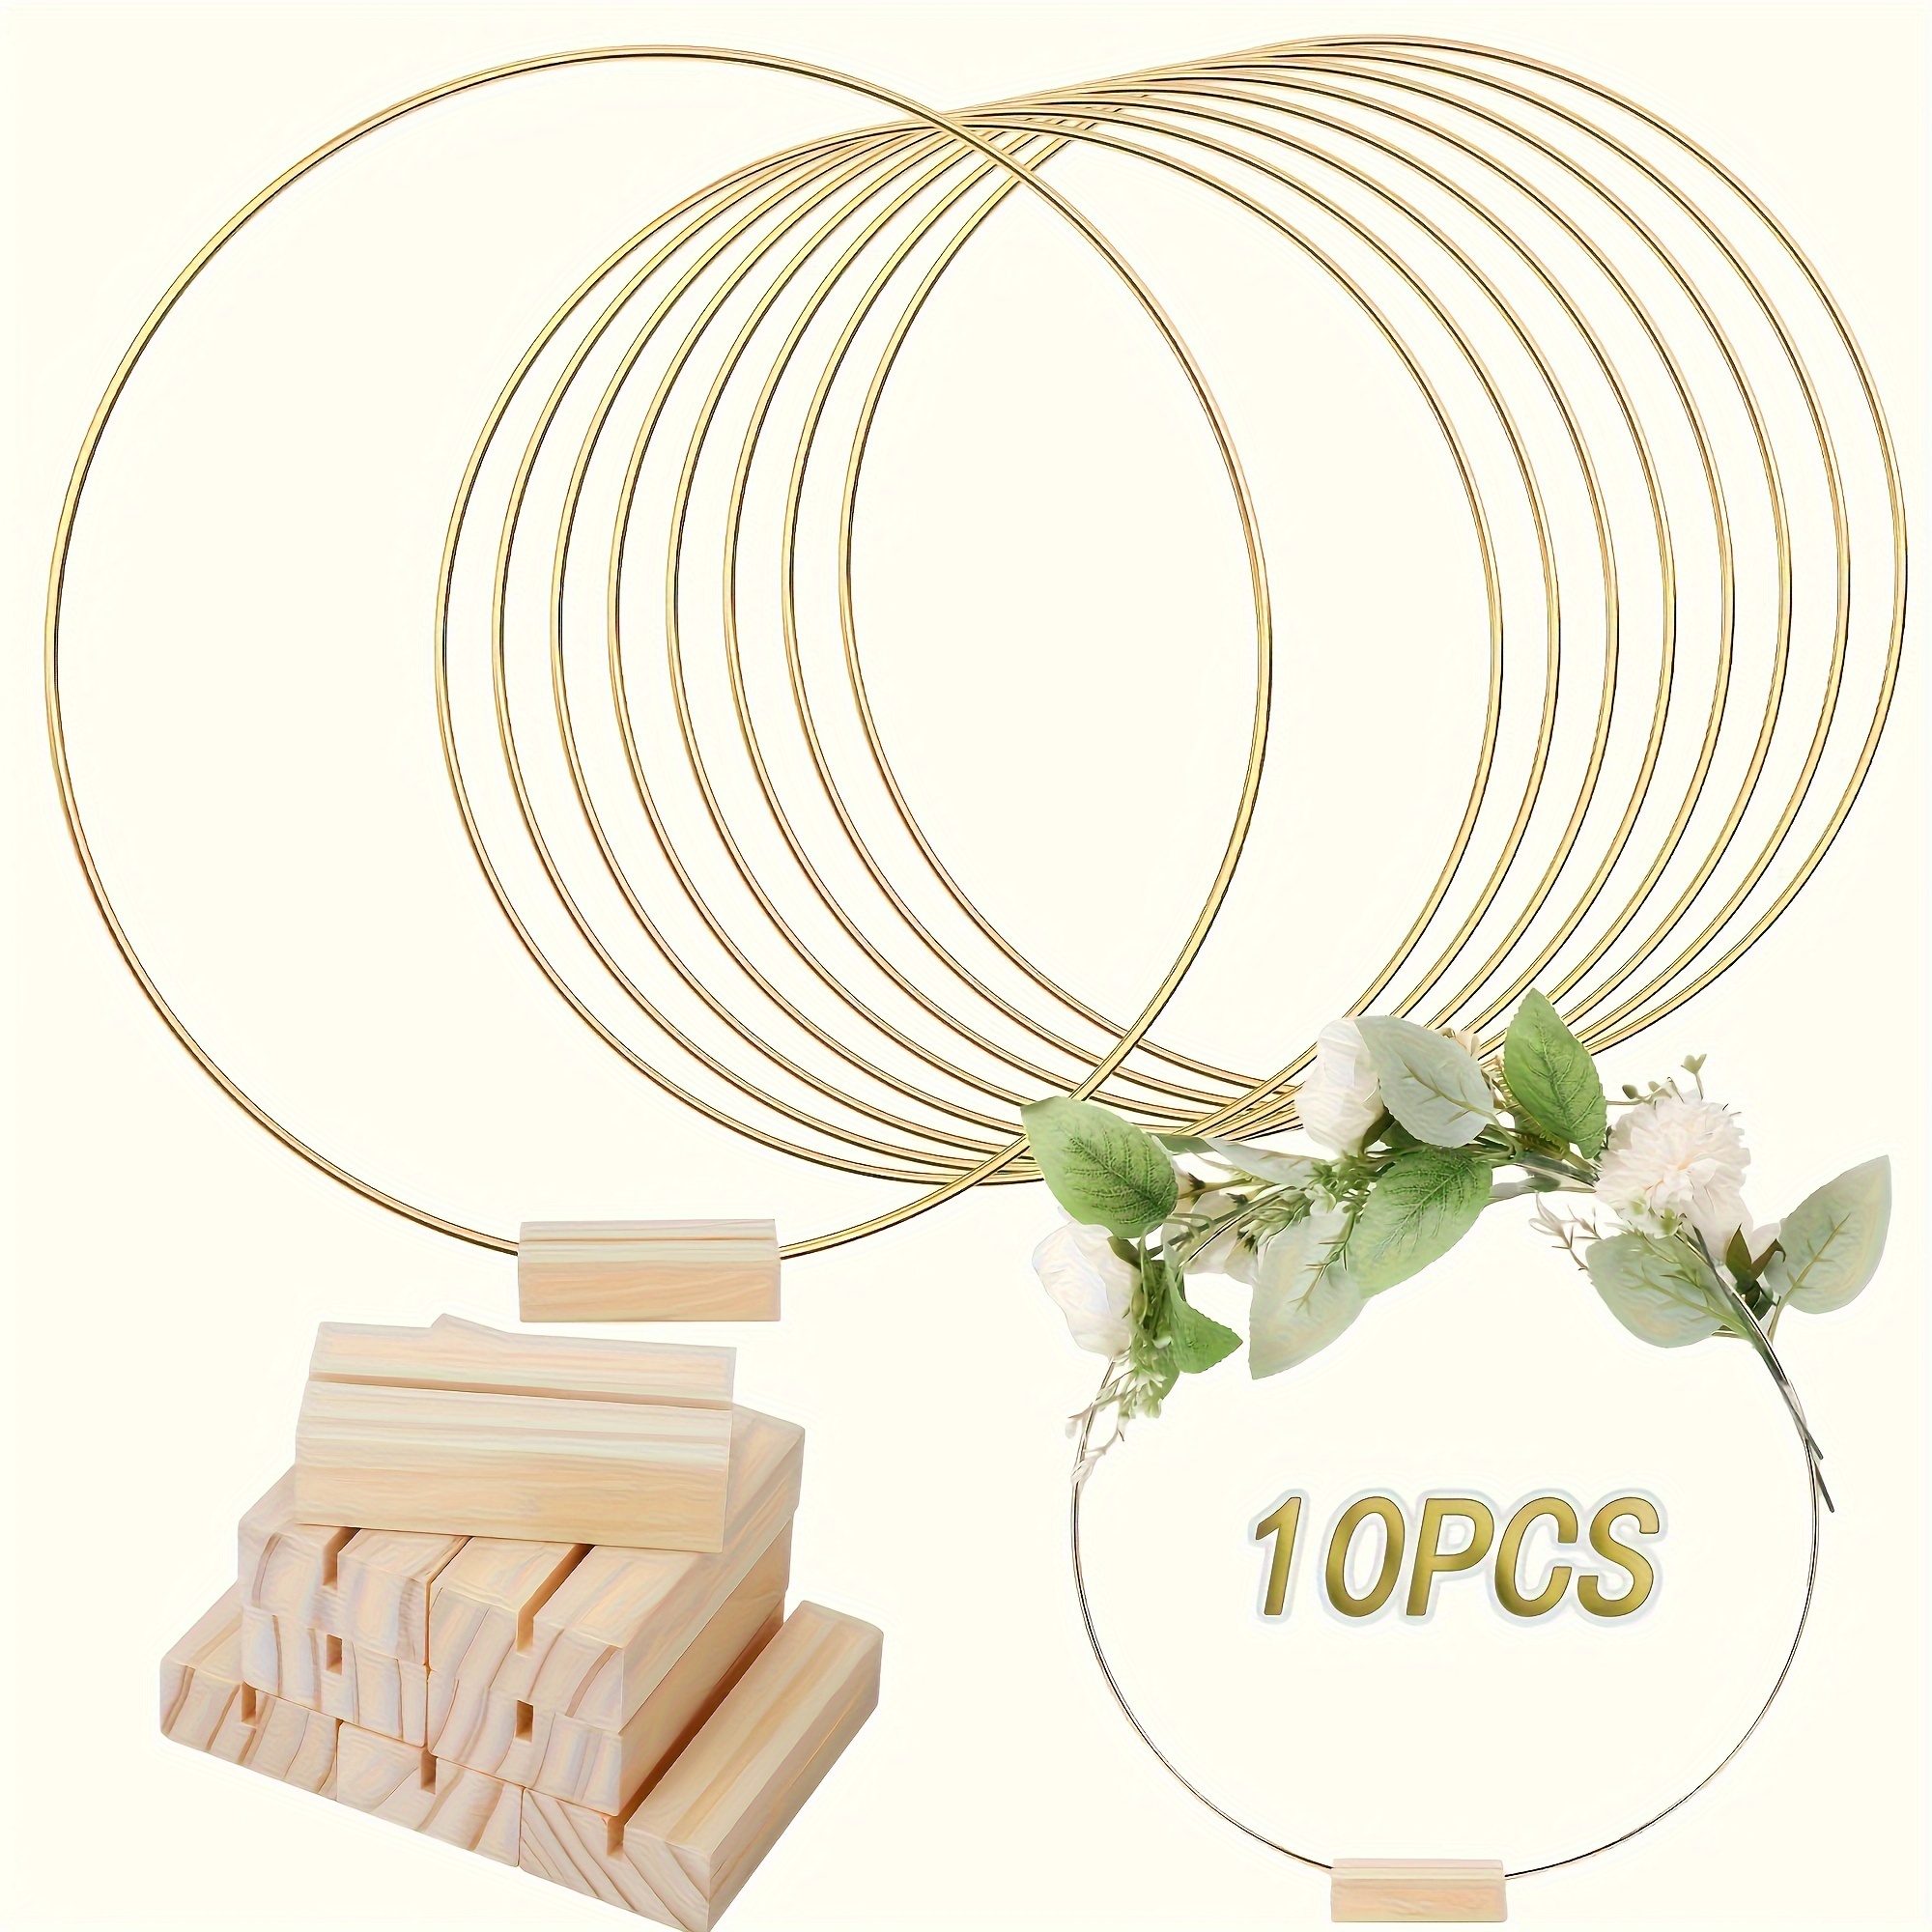 

10-piece Elegant Metal Floral Hoop Centerpieces With Place Card Holders - Ideal For Weddings, Anniversaries & Celebrations Wedding Centerpieces For Tables Centerpieces For Wedding Tables